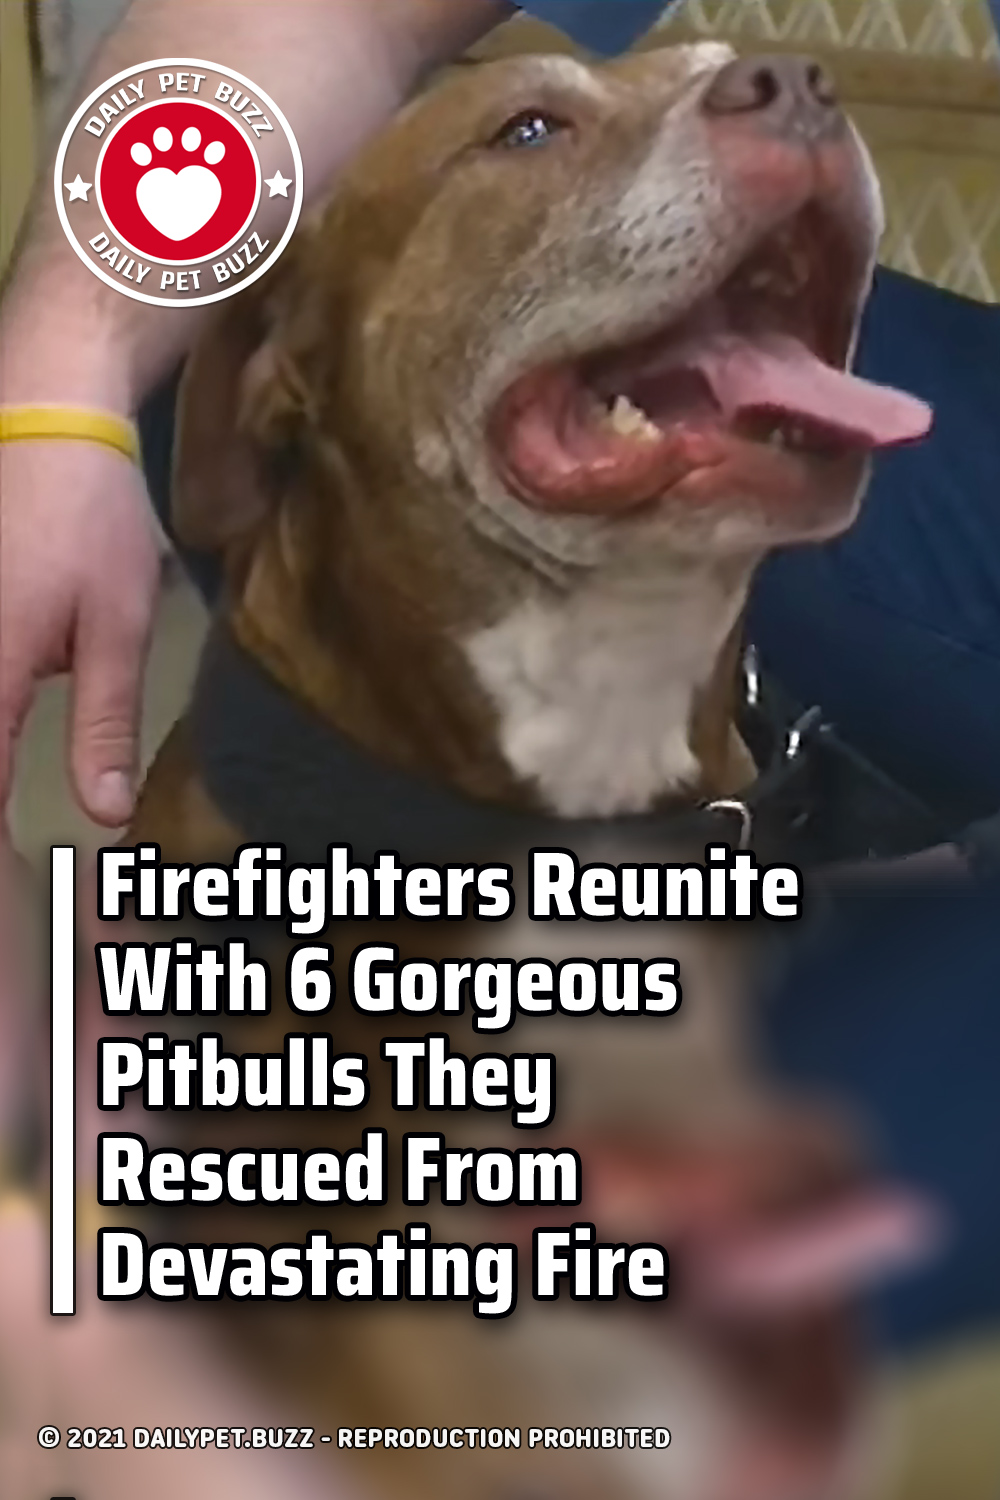 Firefighters Reunite With 6 Gorgeous Pitbulls They Rescued From Devastating Fire